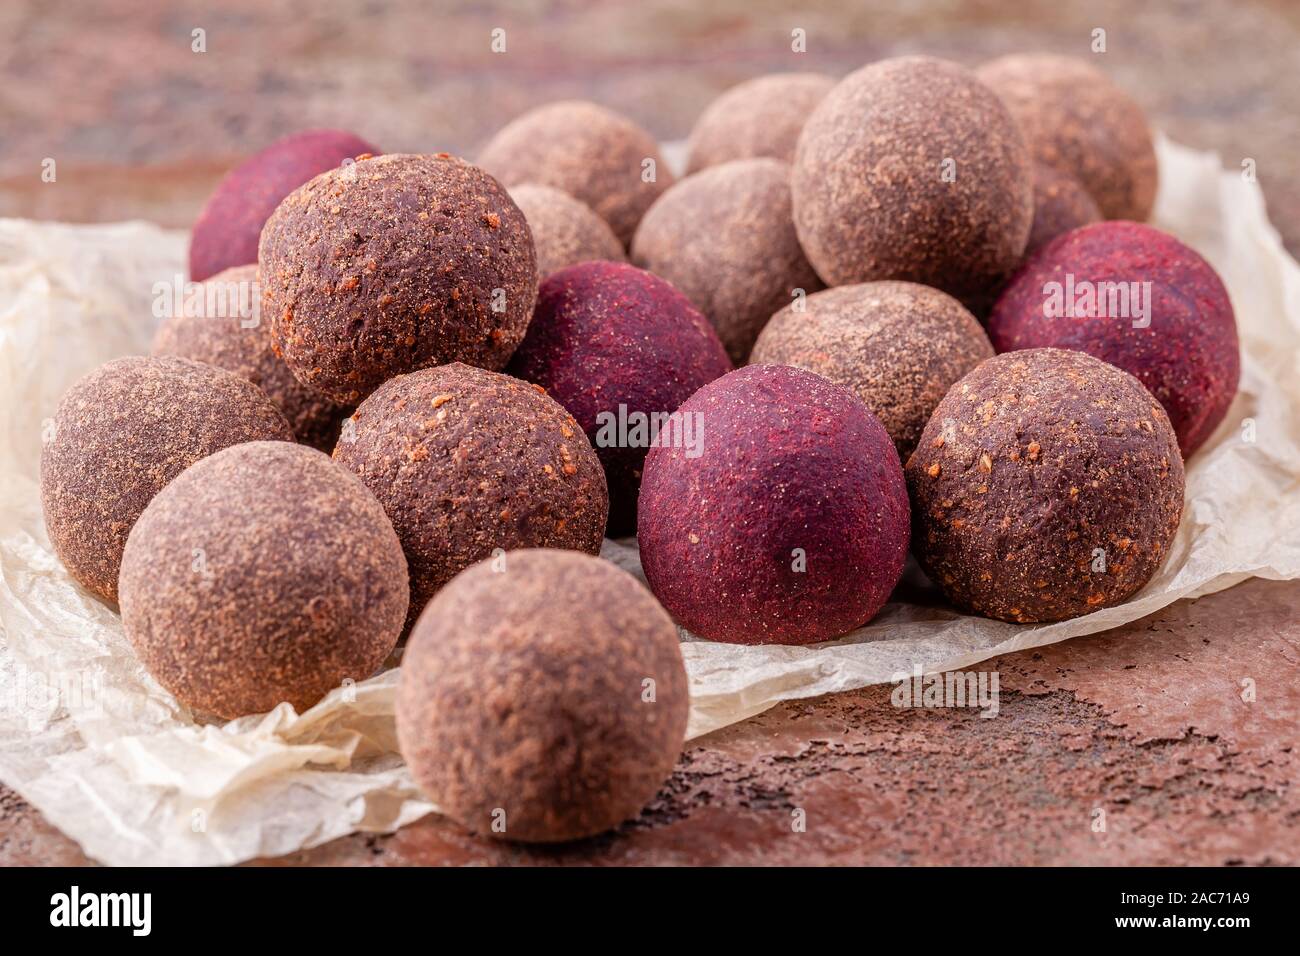 Close Up of Homemade Raw Vegan Cocoa Energy Balls on Craft Paper Stock Photo